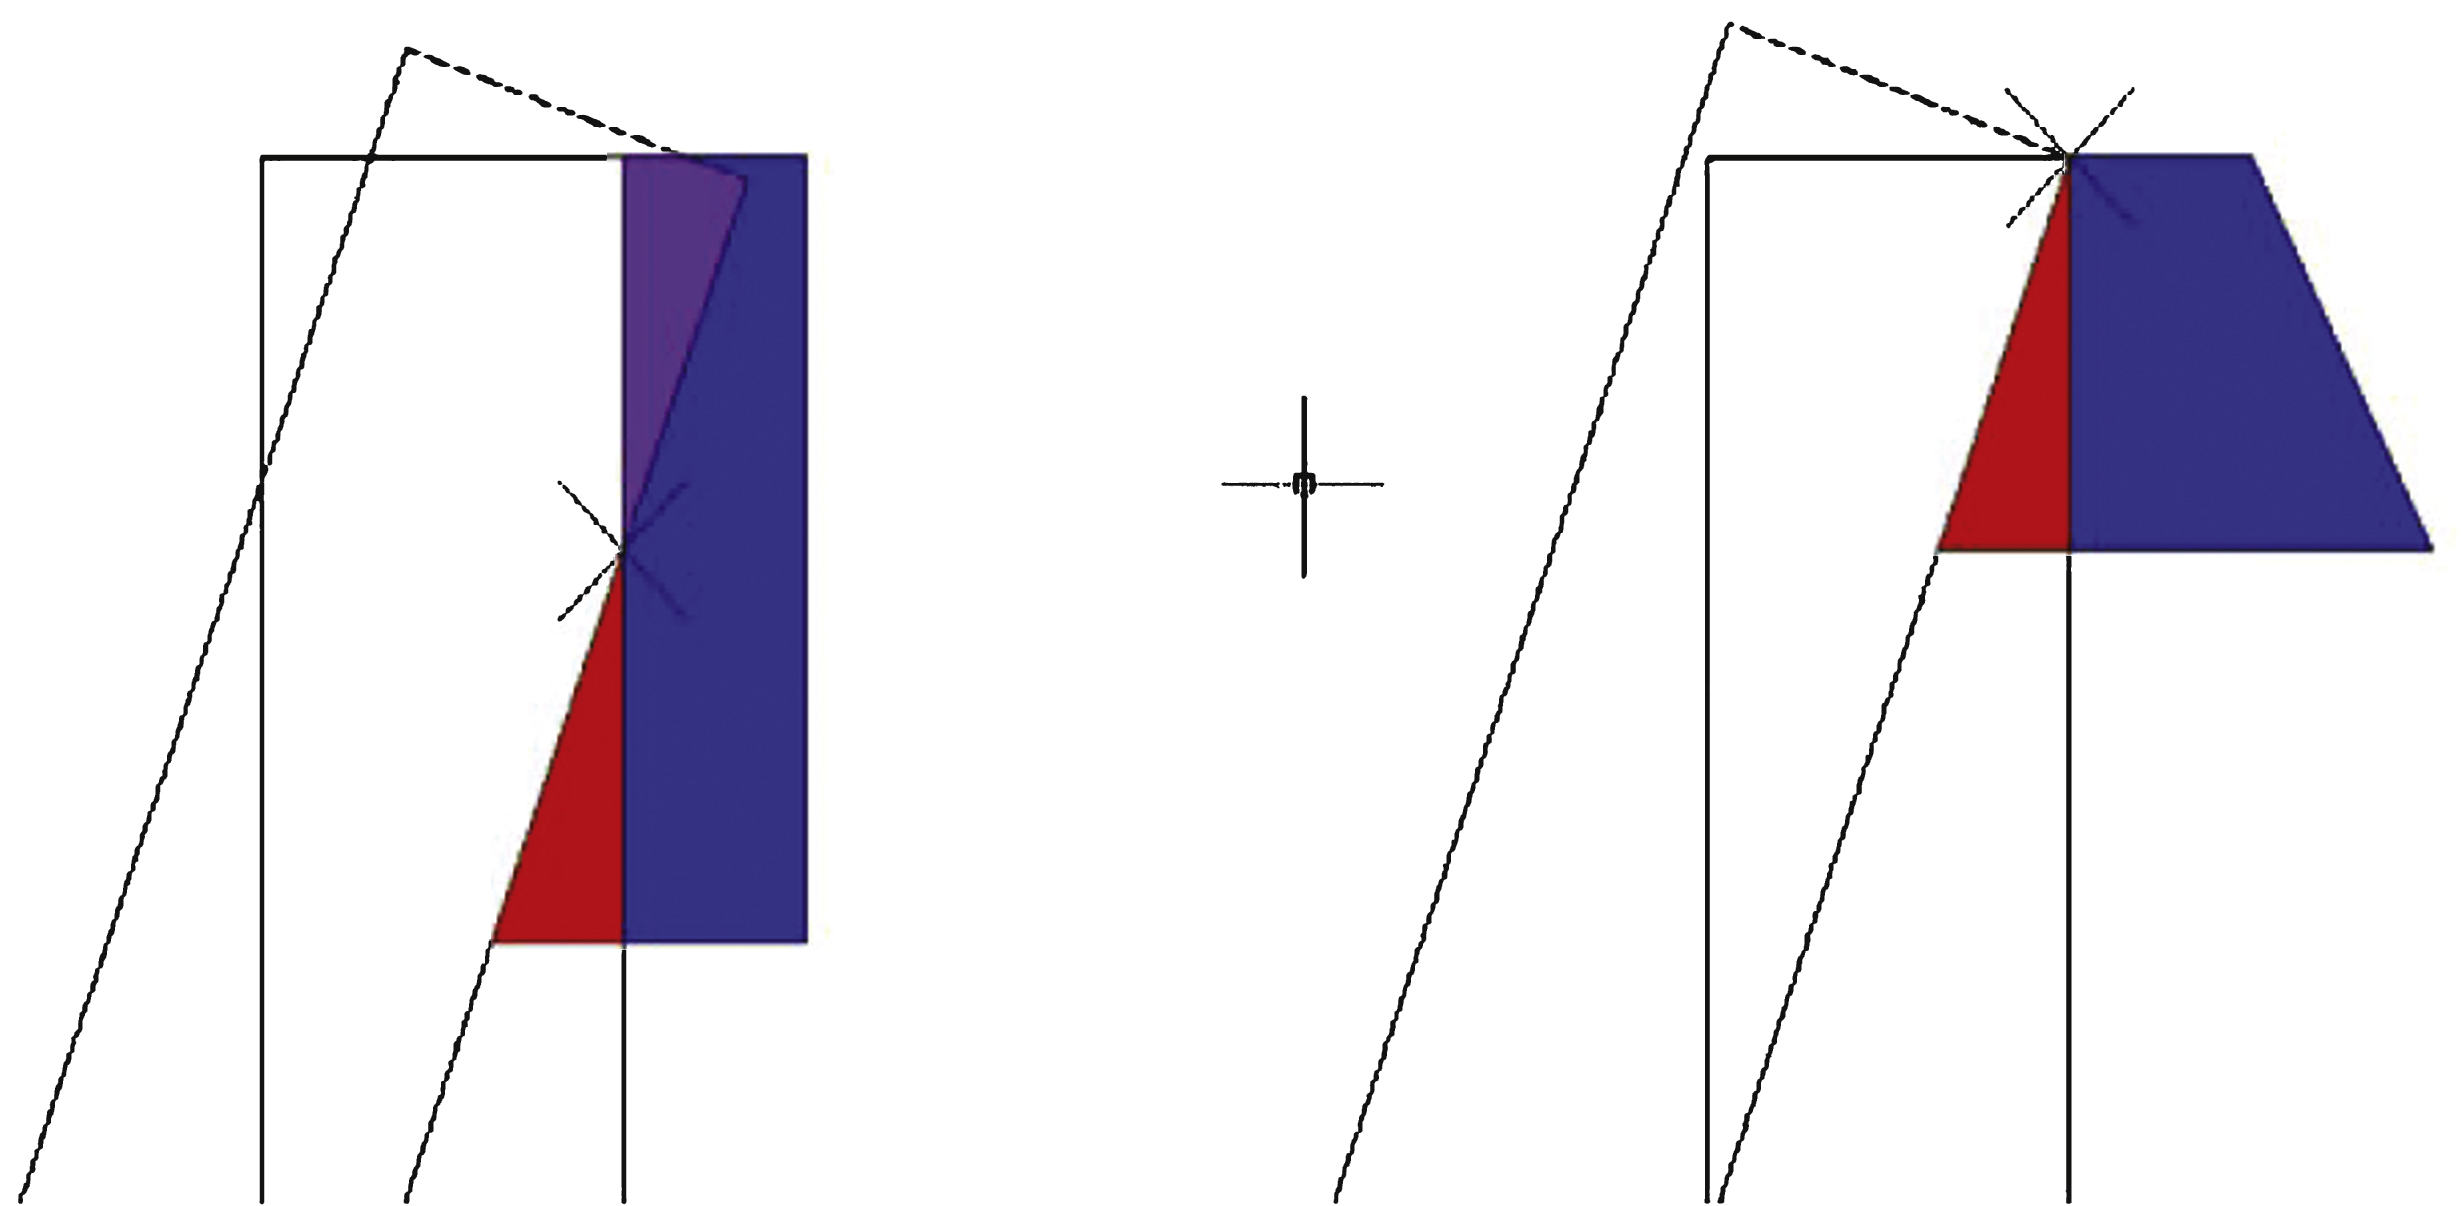 Schematic of glass rotation for traditional and trapezoidal silicone joints.